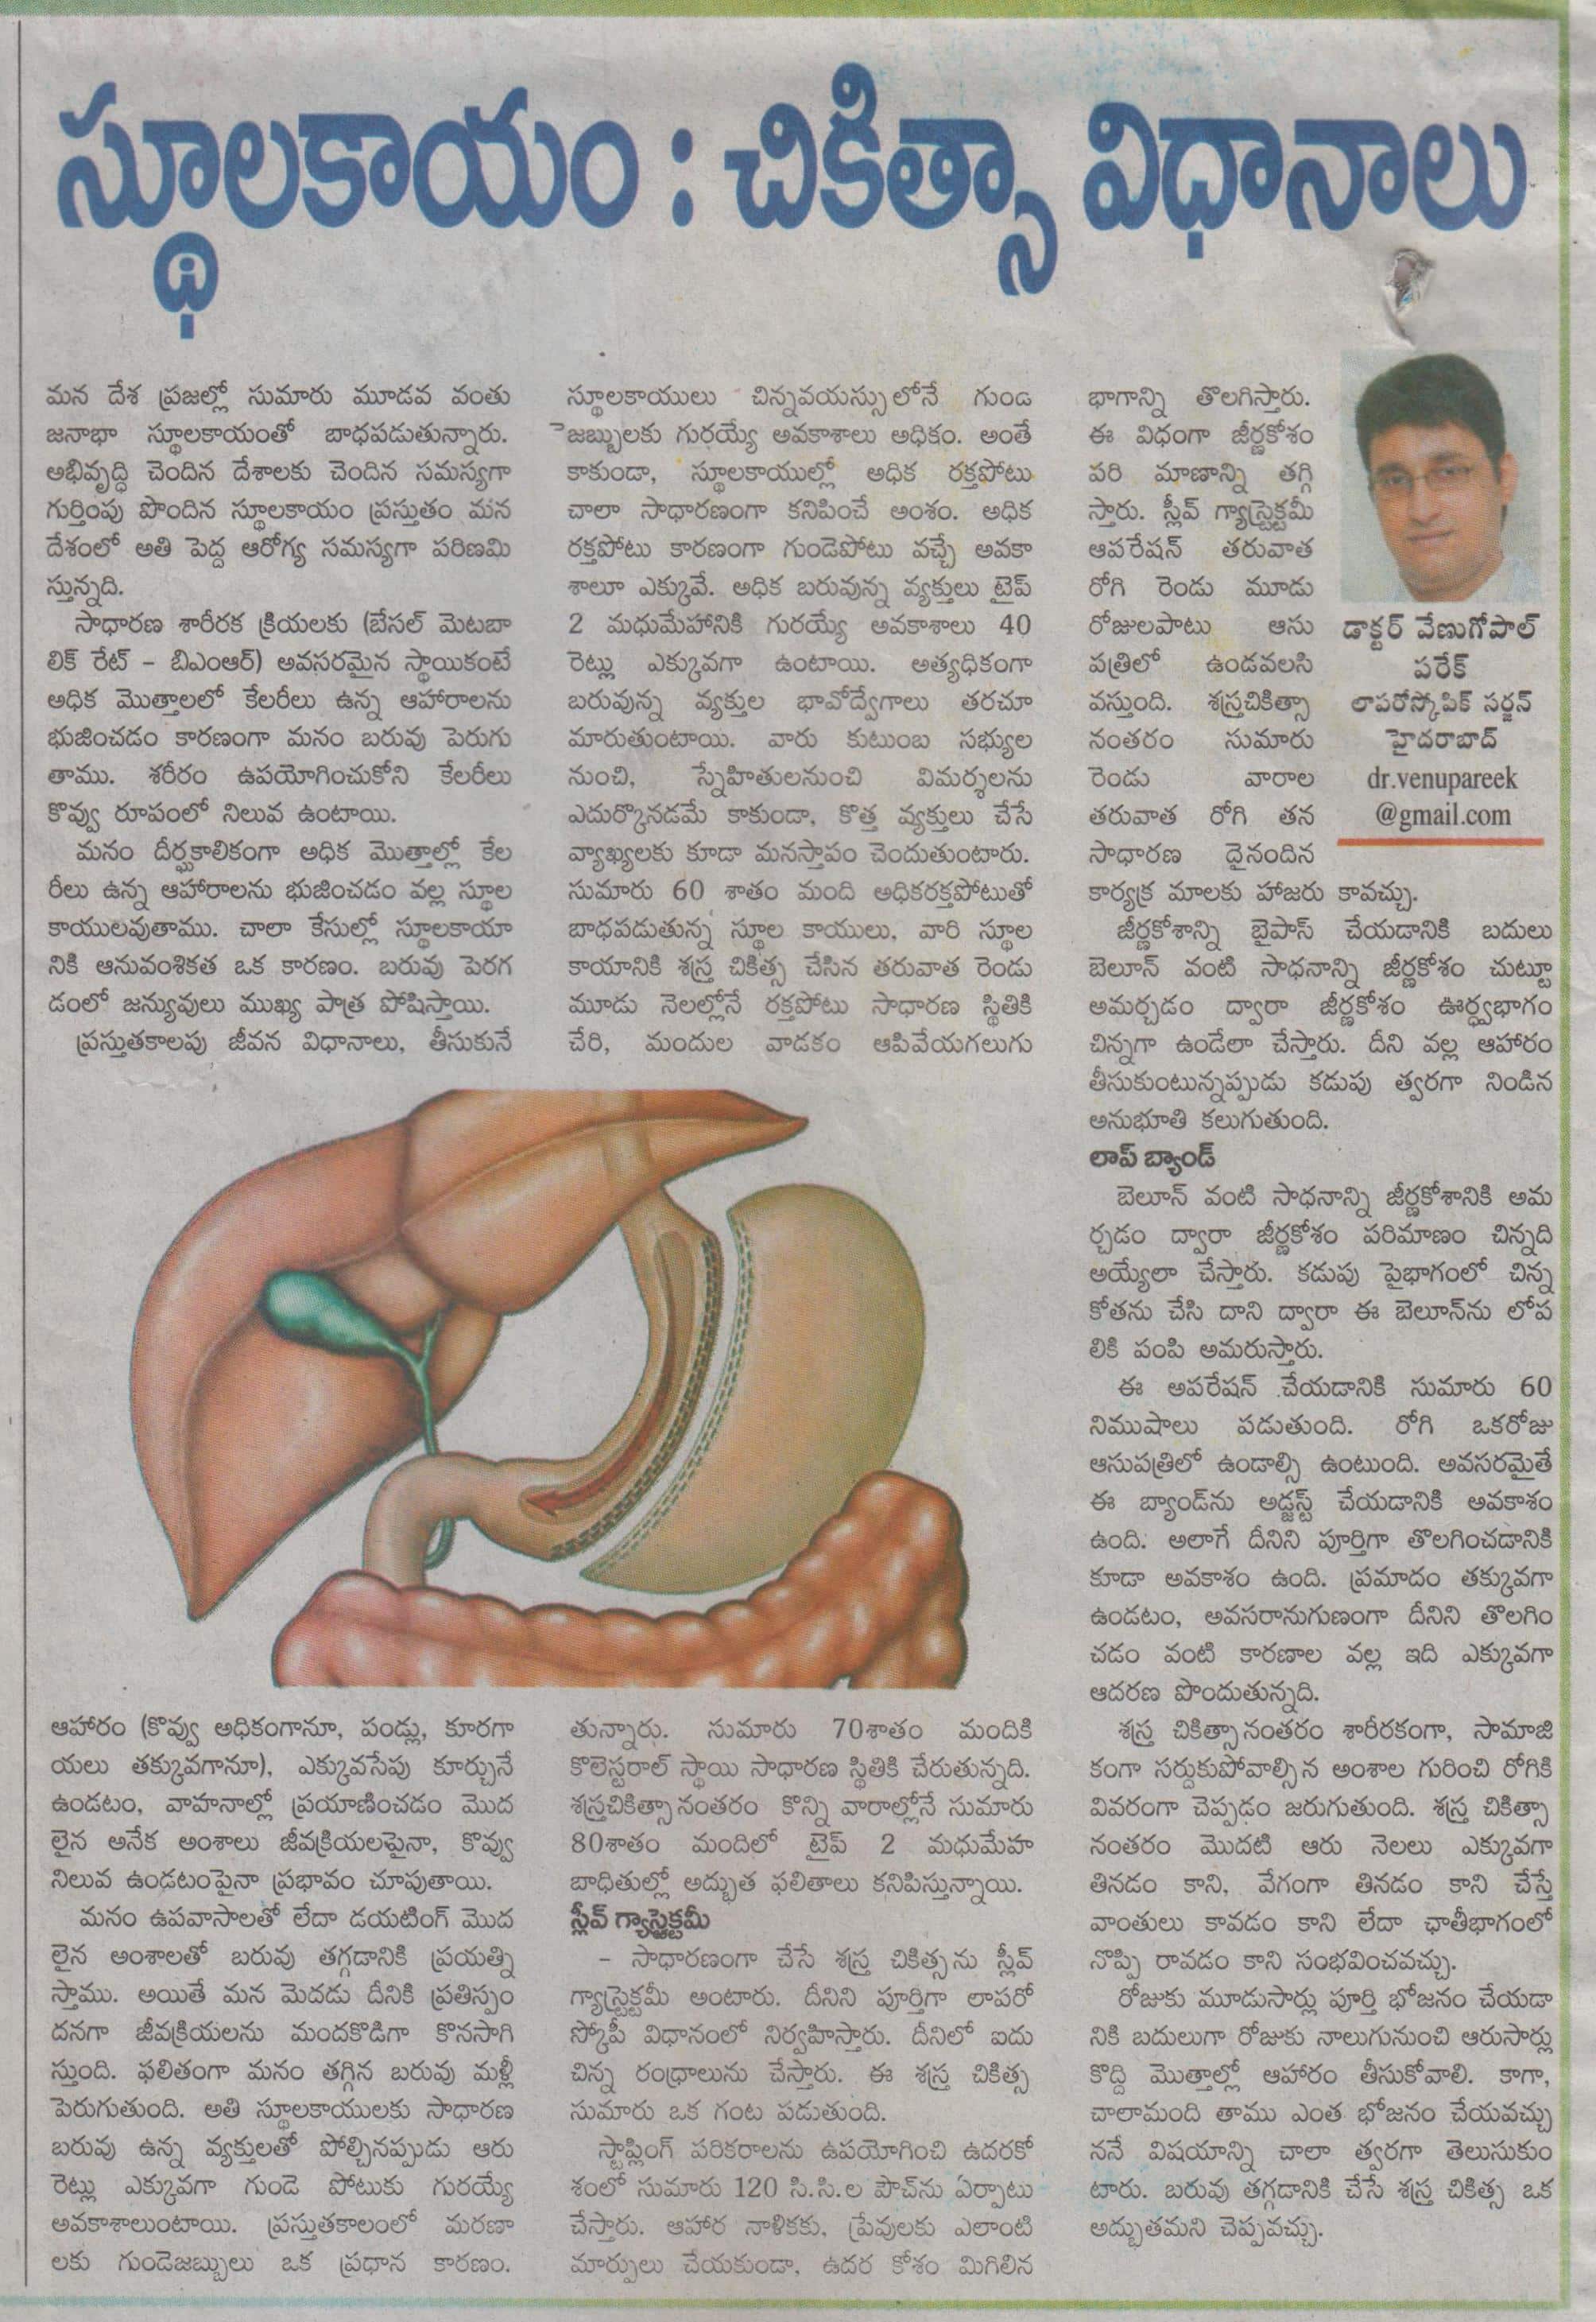 Treatment for Overweight & Obesity: explained by Dr Pareek in Telugu newspaper